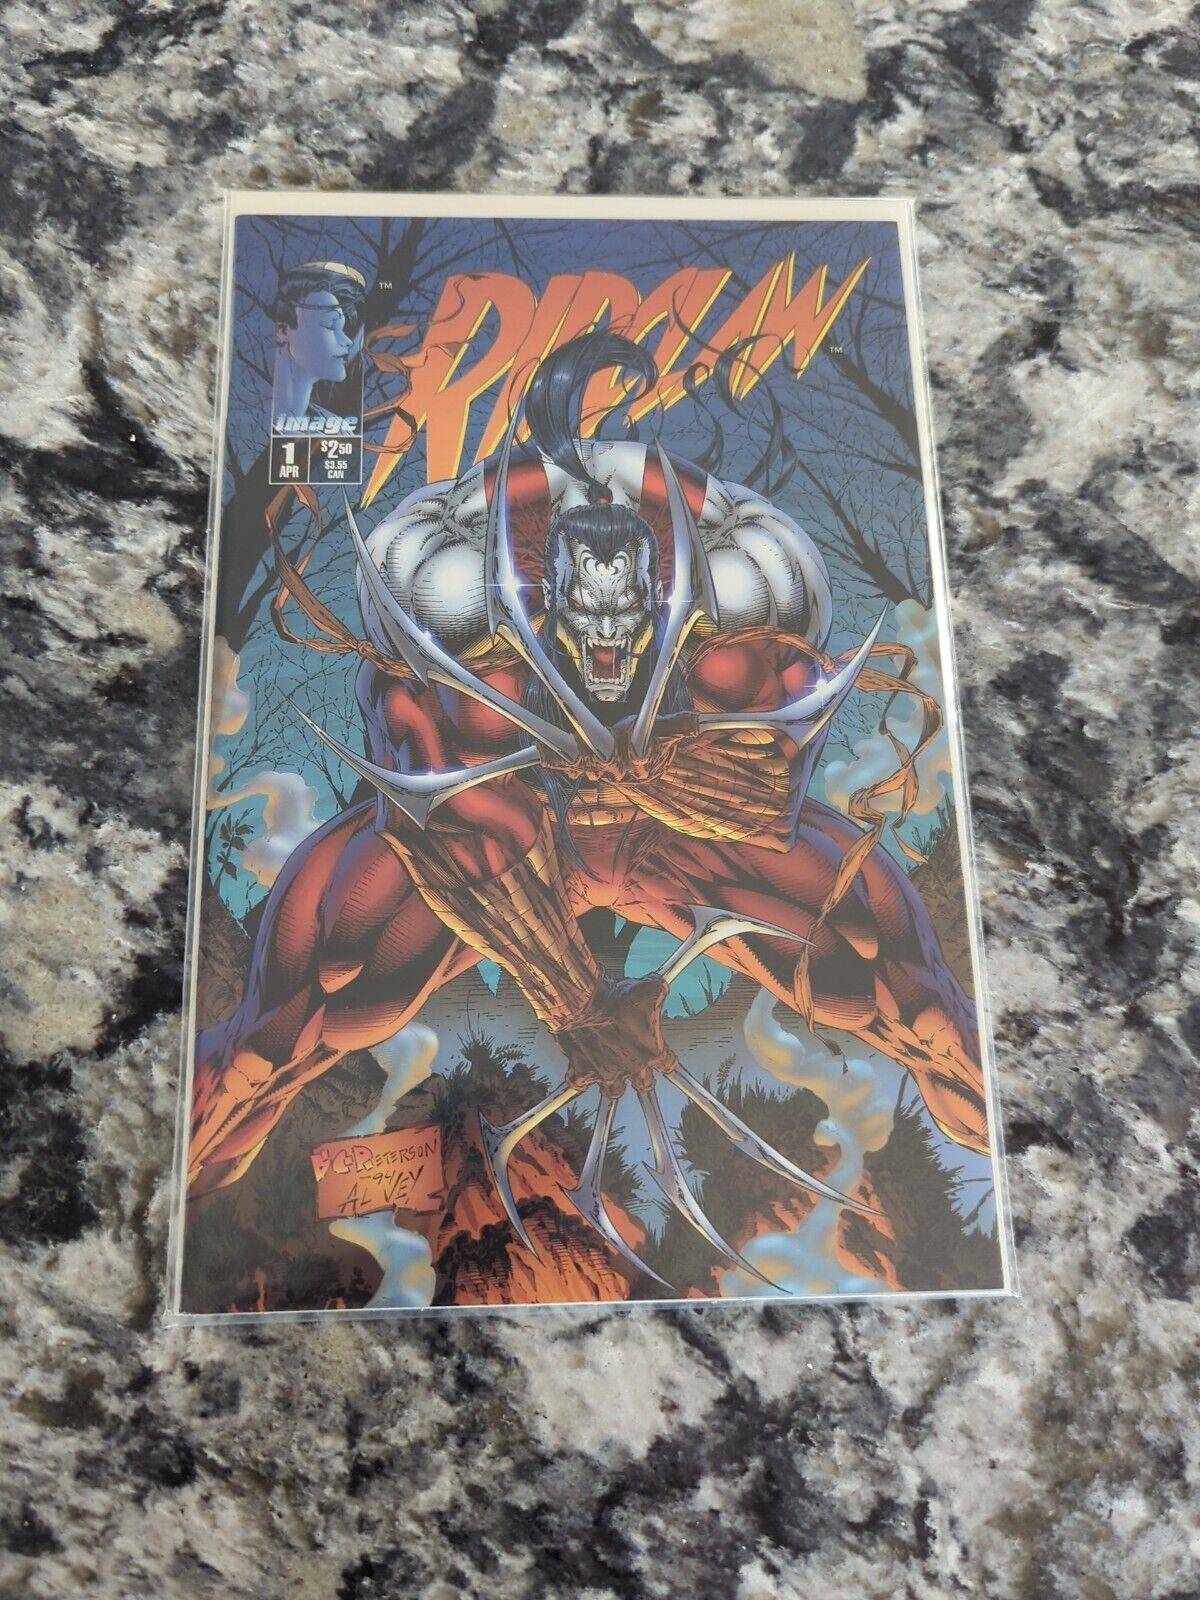 Ripclaw (Apr 1995 series) #1 in Near Mint condition. Image comics [v~